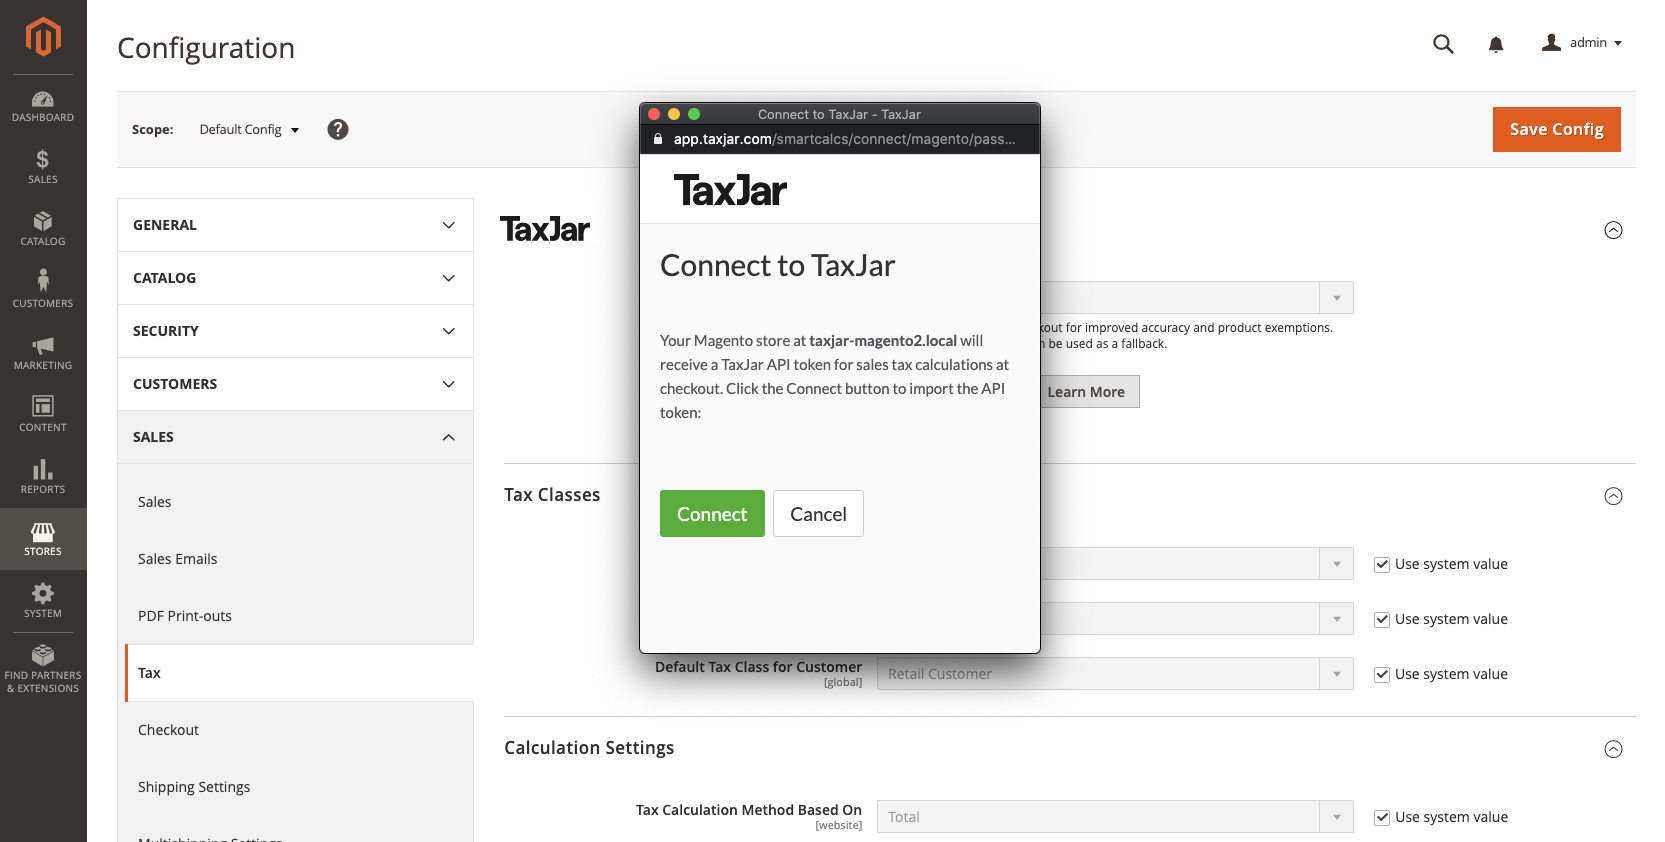 TaxJar Connect Confirmation